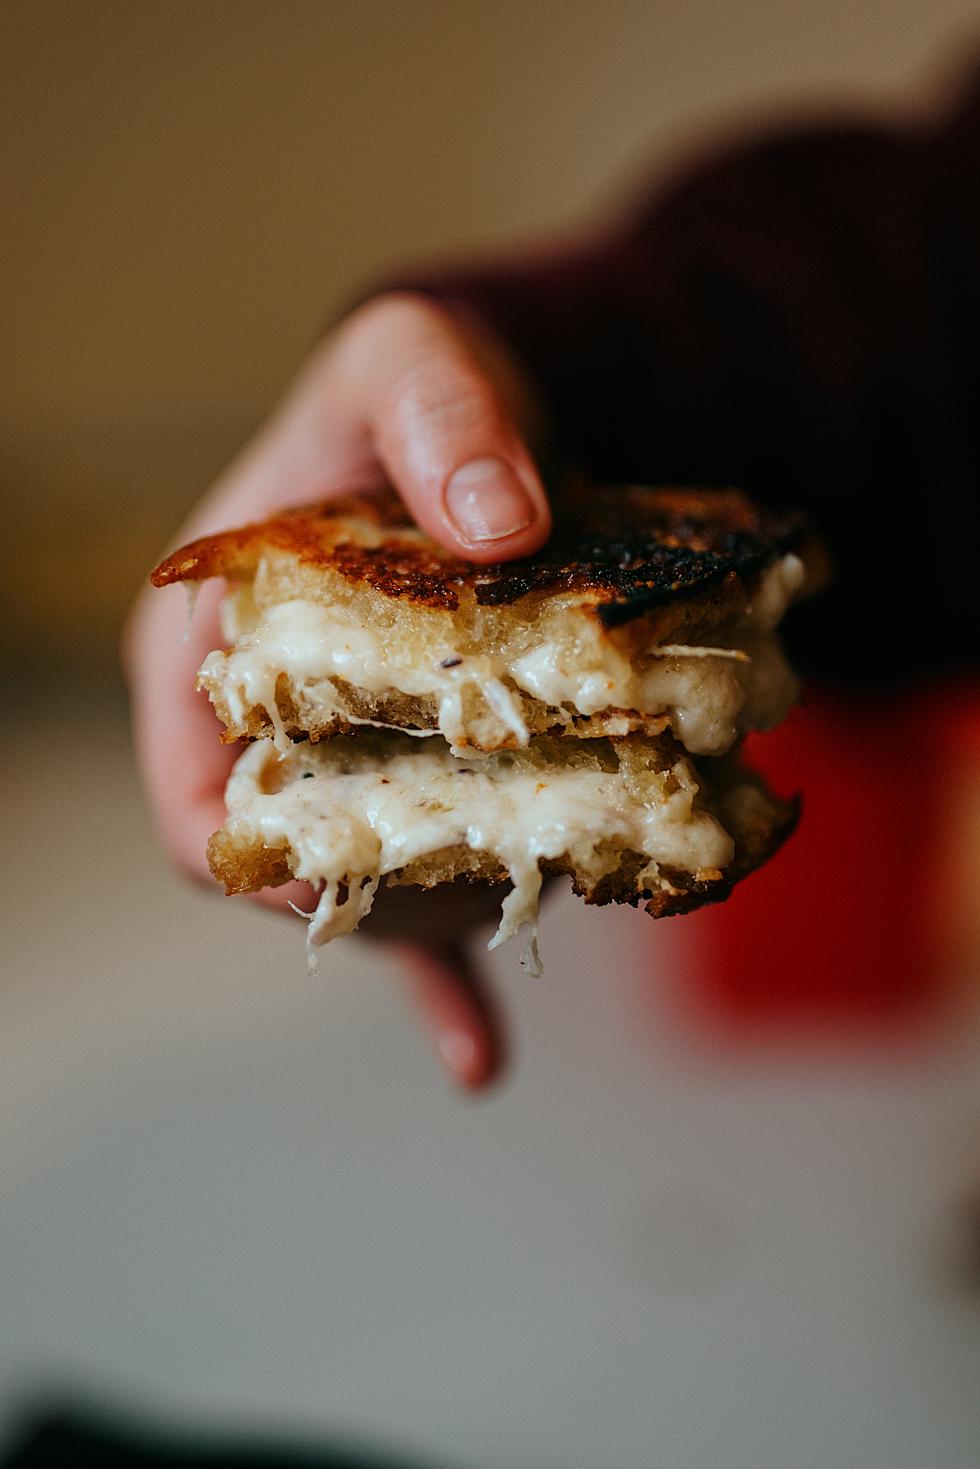 When Is a Grilled Cheese No Longer a Grilled Cheese?